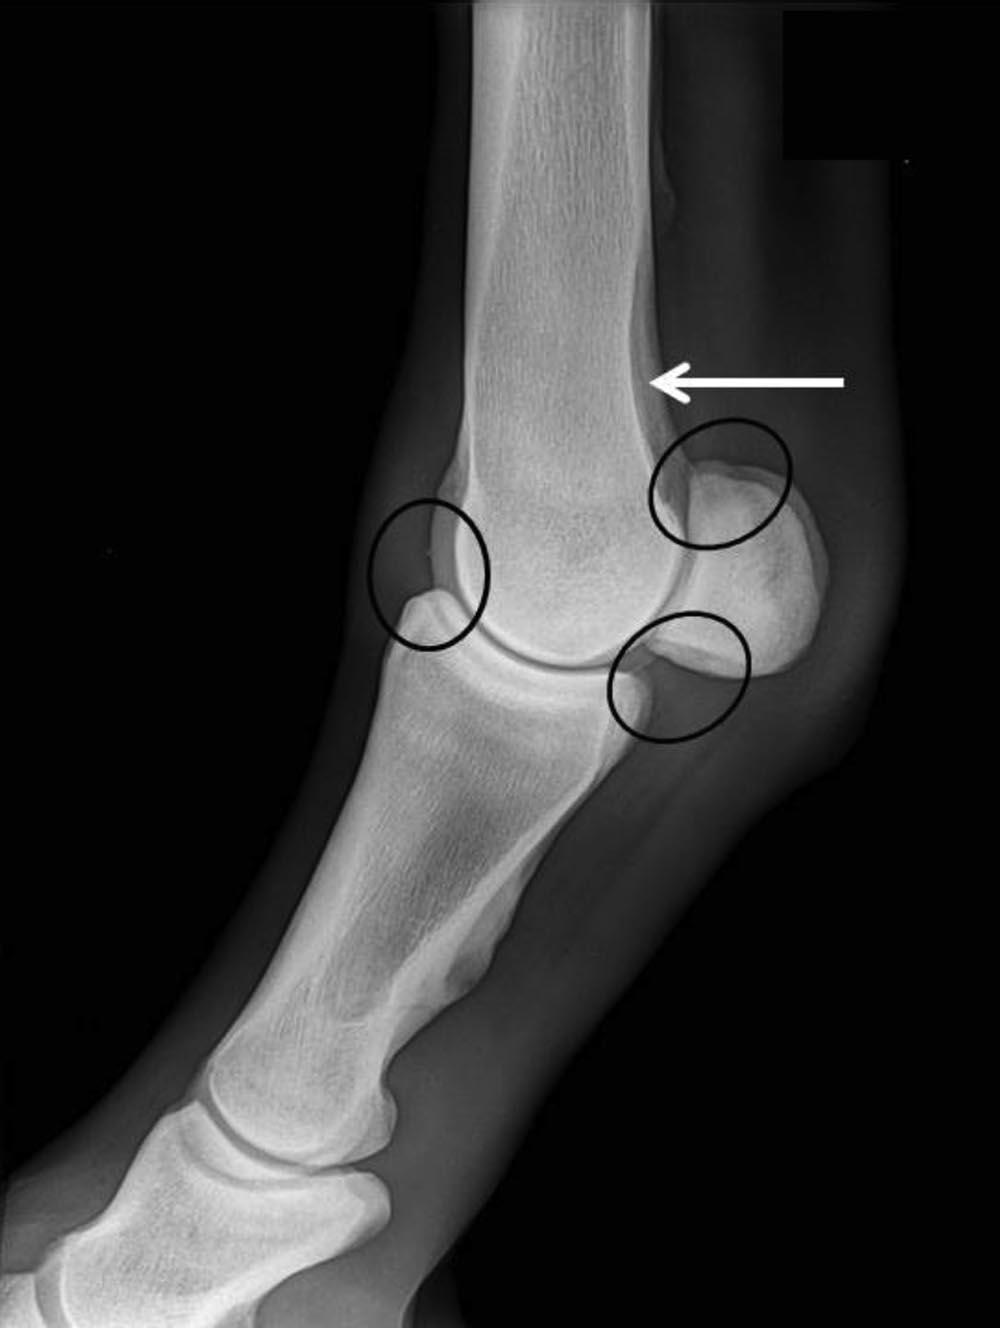 (4) Supracondylar lysis of MC/MT3 (5) Apical sesamoid fragments (6) Palmar/plantar proximal P1 fragments Lateral to medial (flexed) projection of the fetlock joint (Fig. 3).